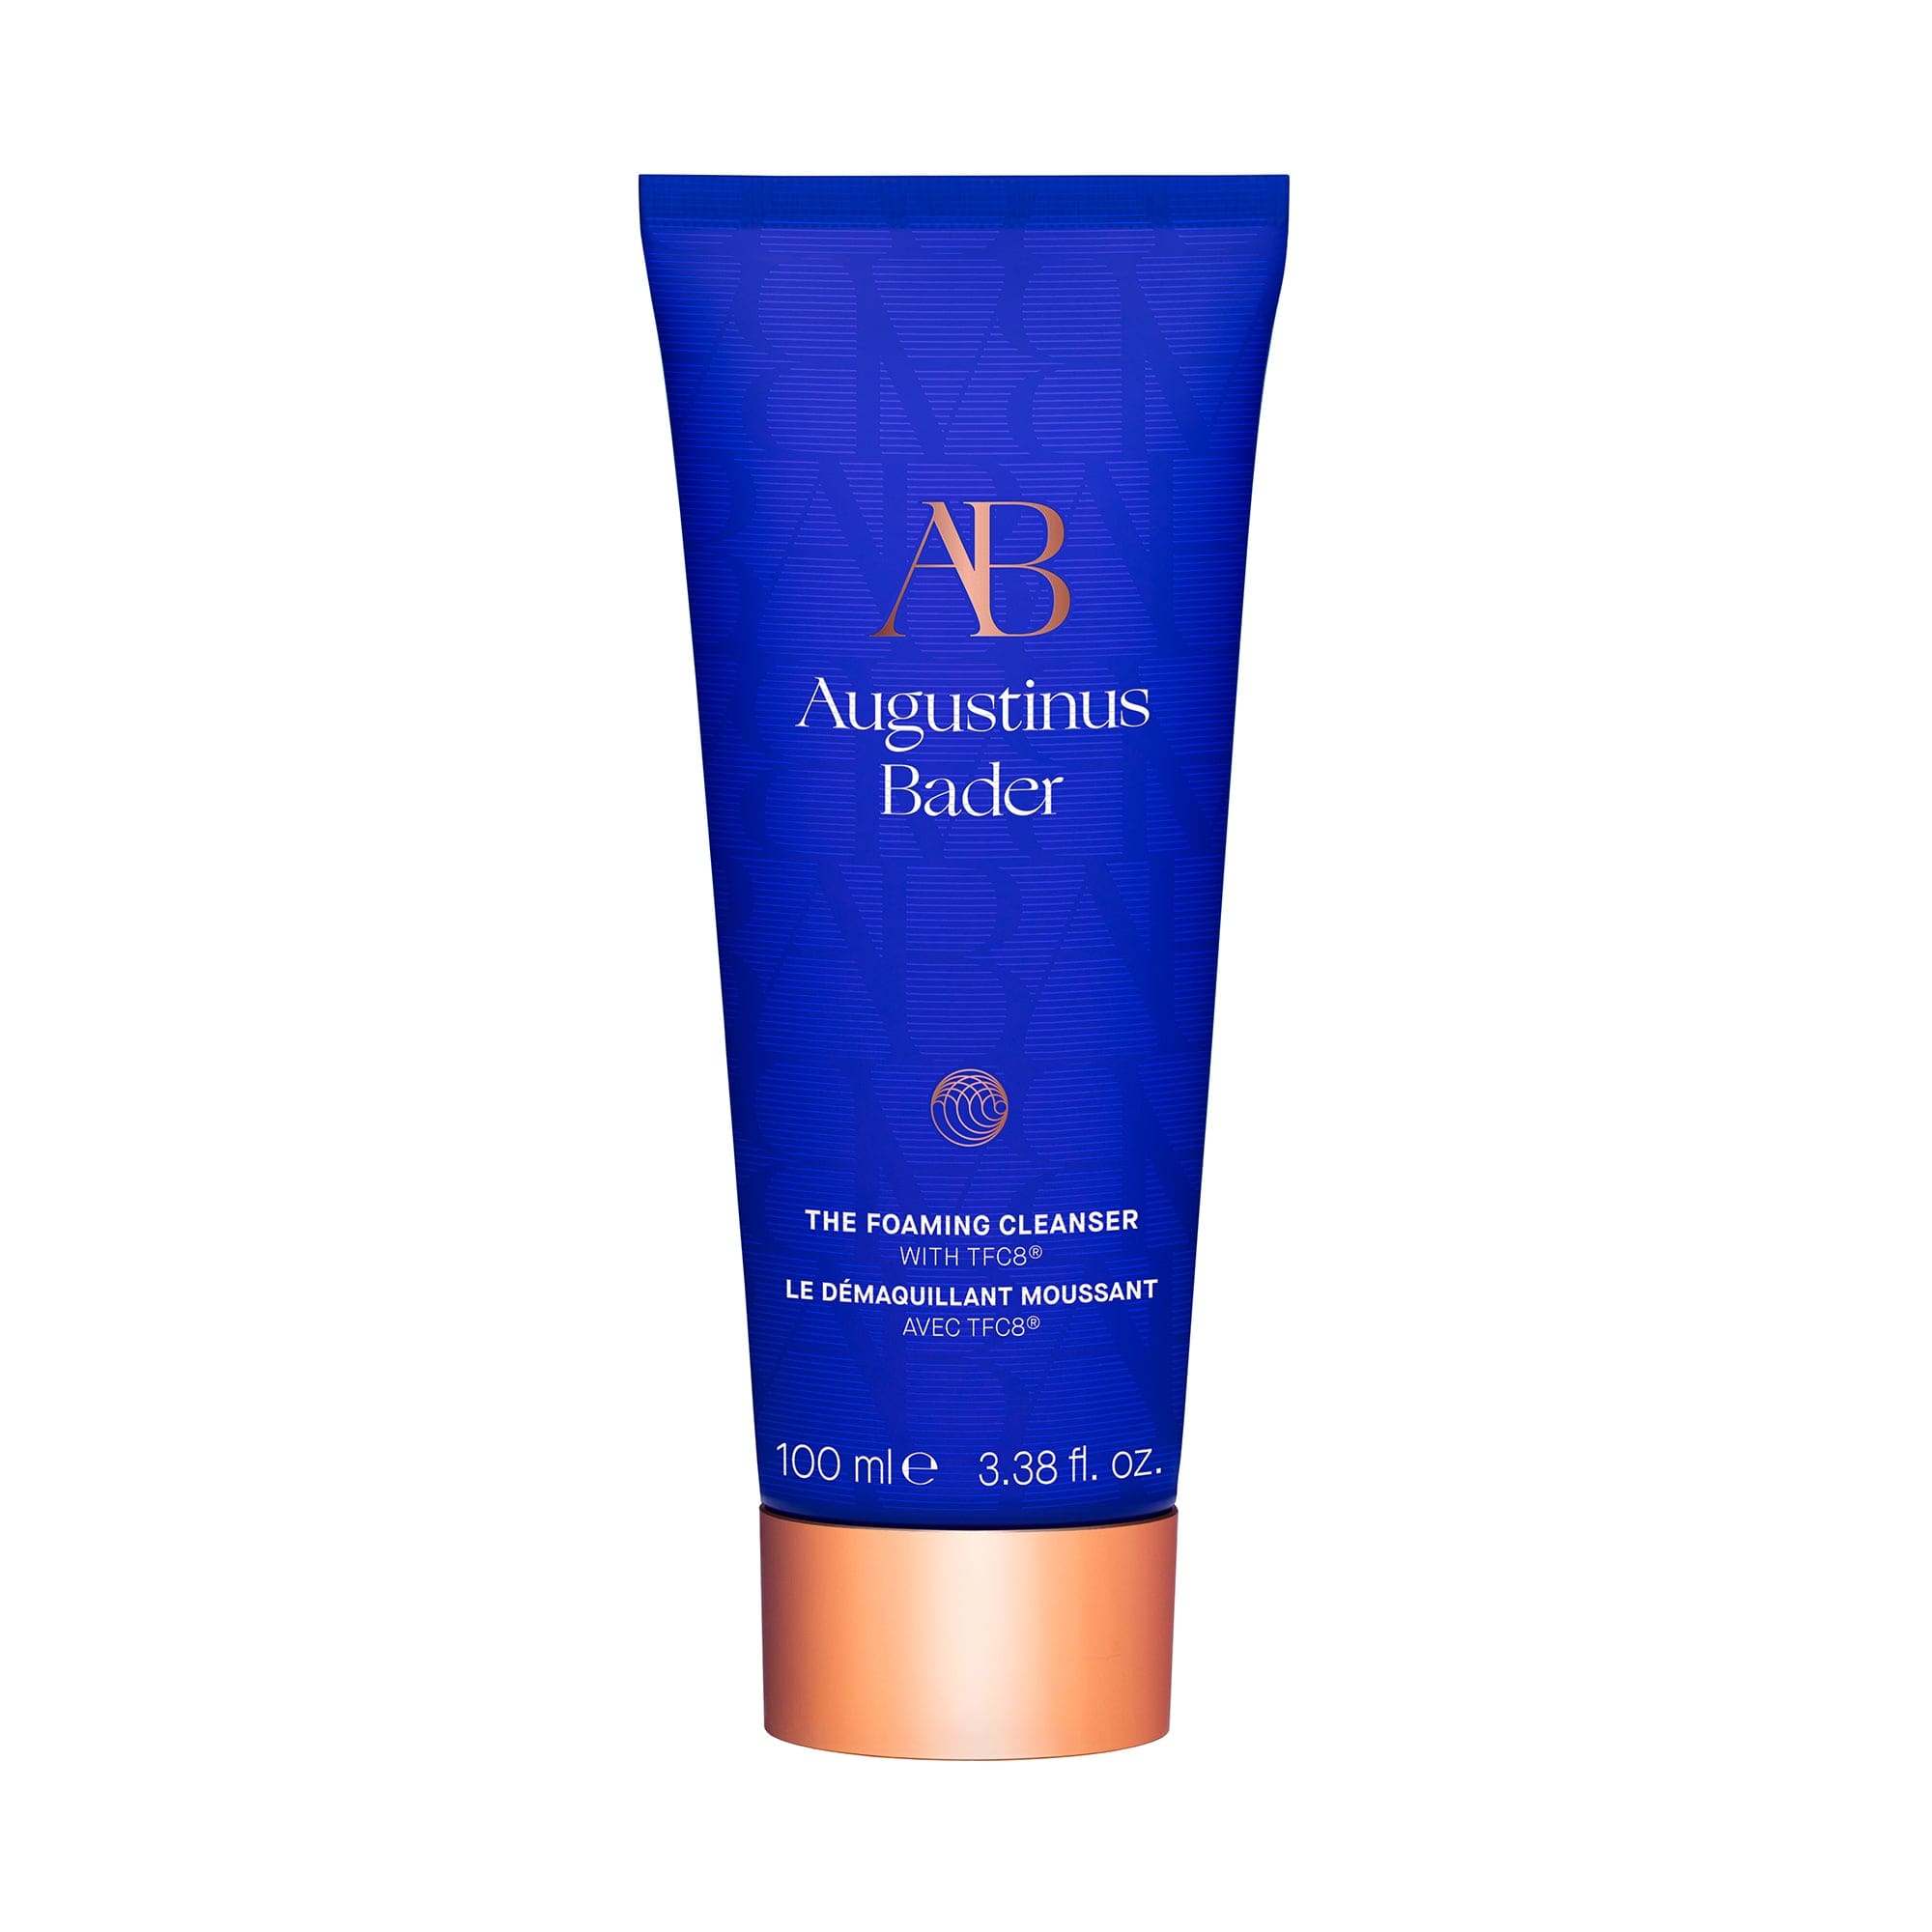 The Foaming Cleanser Augustinus Bader Face Cleanser